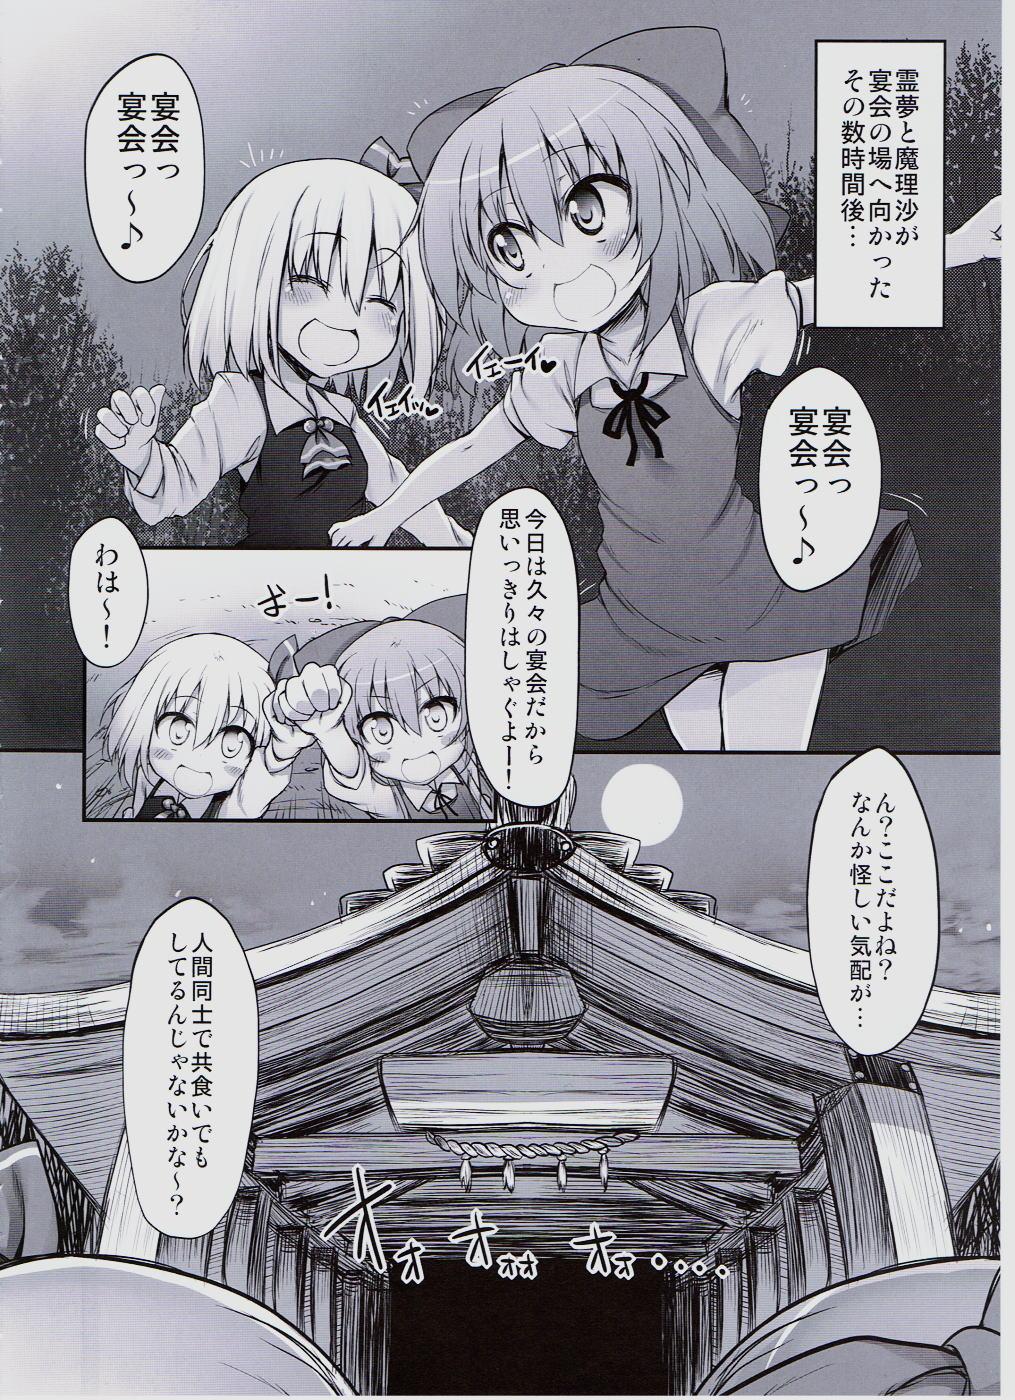 Sis Gensoukyou no Utage - Touhou project Chica - Page 3